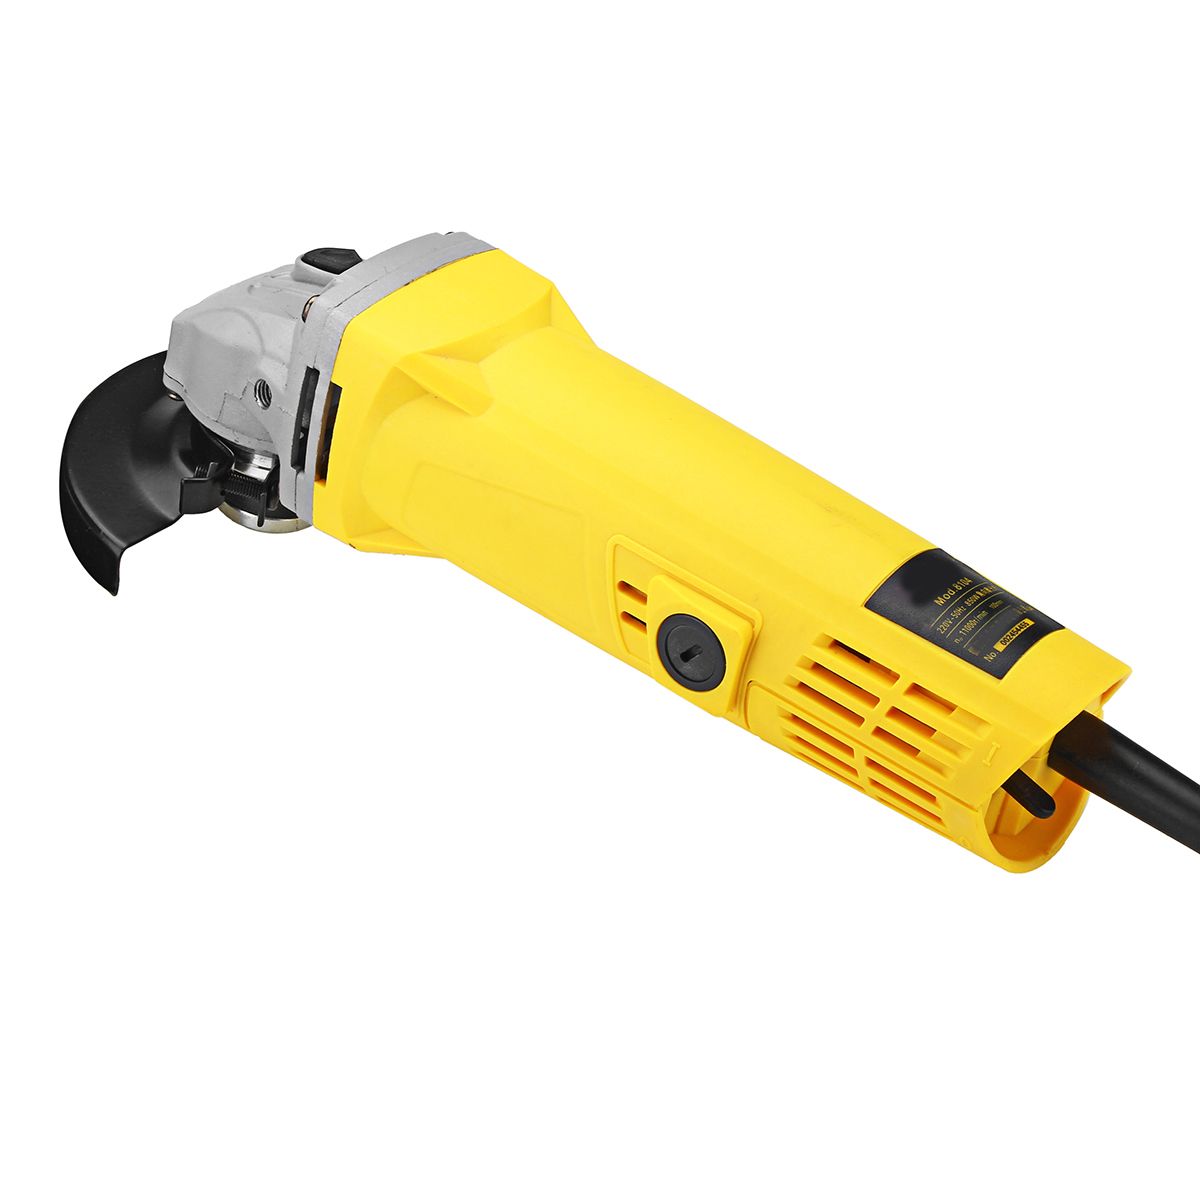 100mm-850W-220V-Portable-Electric-Angle-Grinder-Muti-Function-Household-Polish-Machine-Grinding-Cutt-1391941